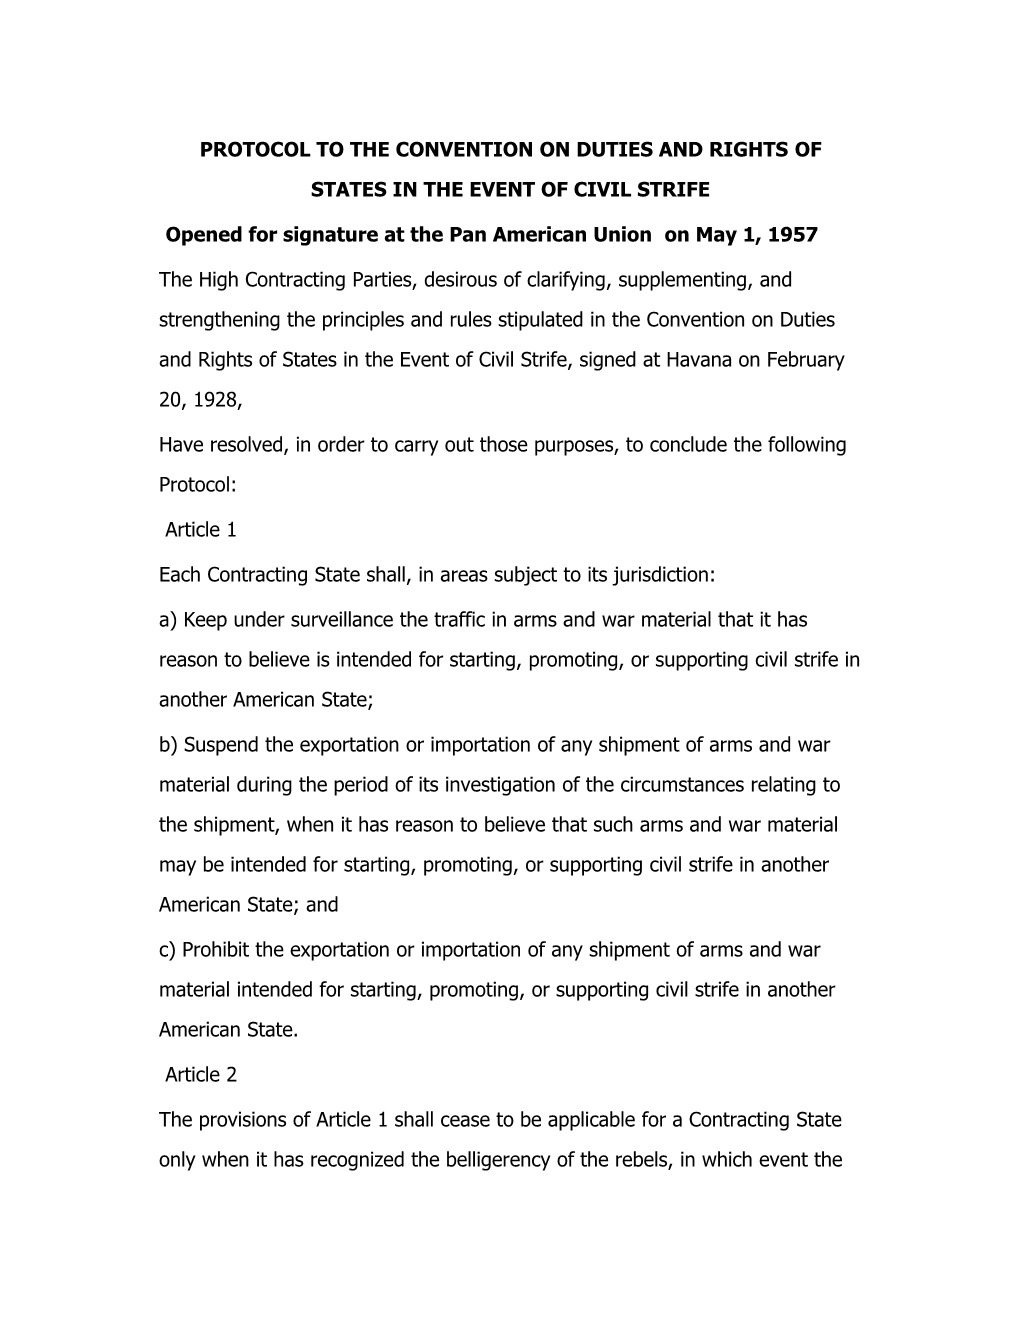 Protocol to the Convention on Duties and Rightsof States in the Event of Civil Strife